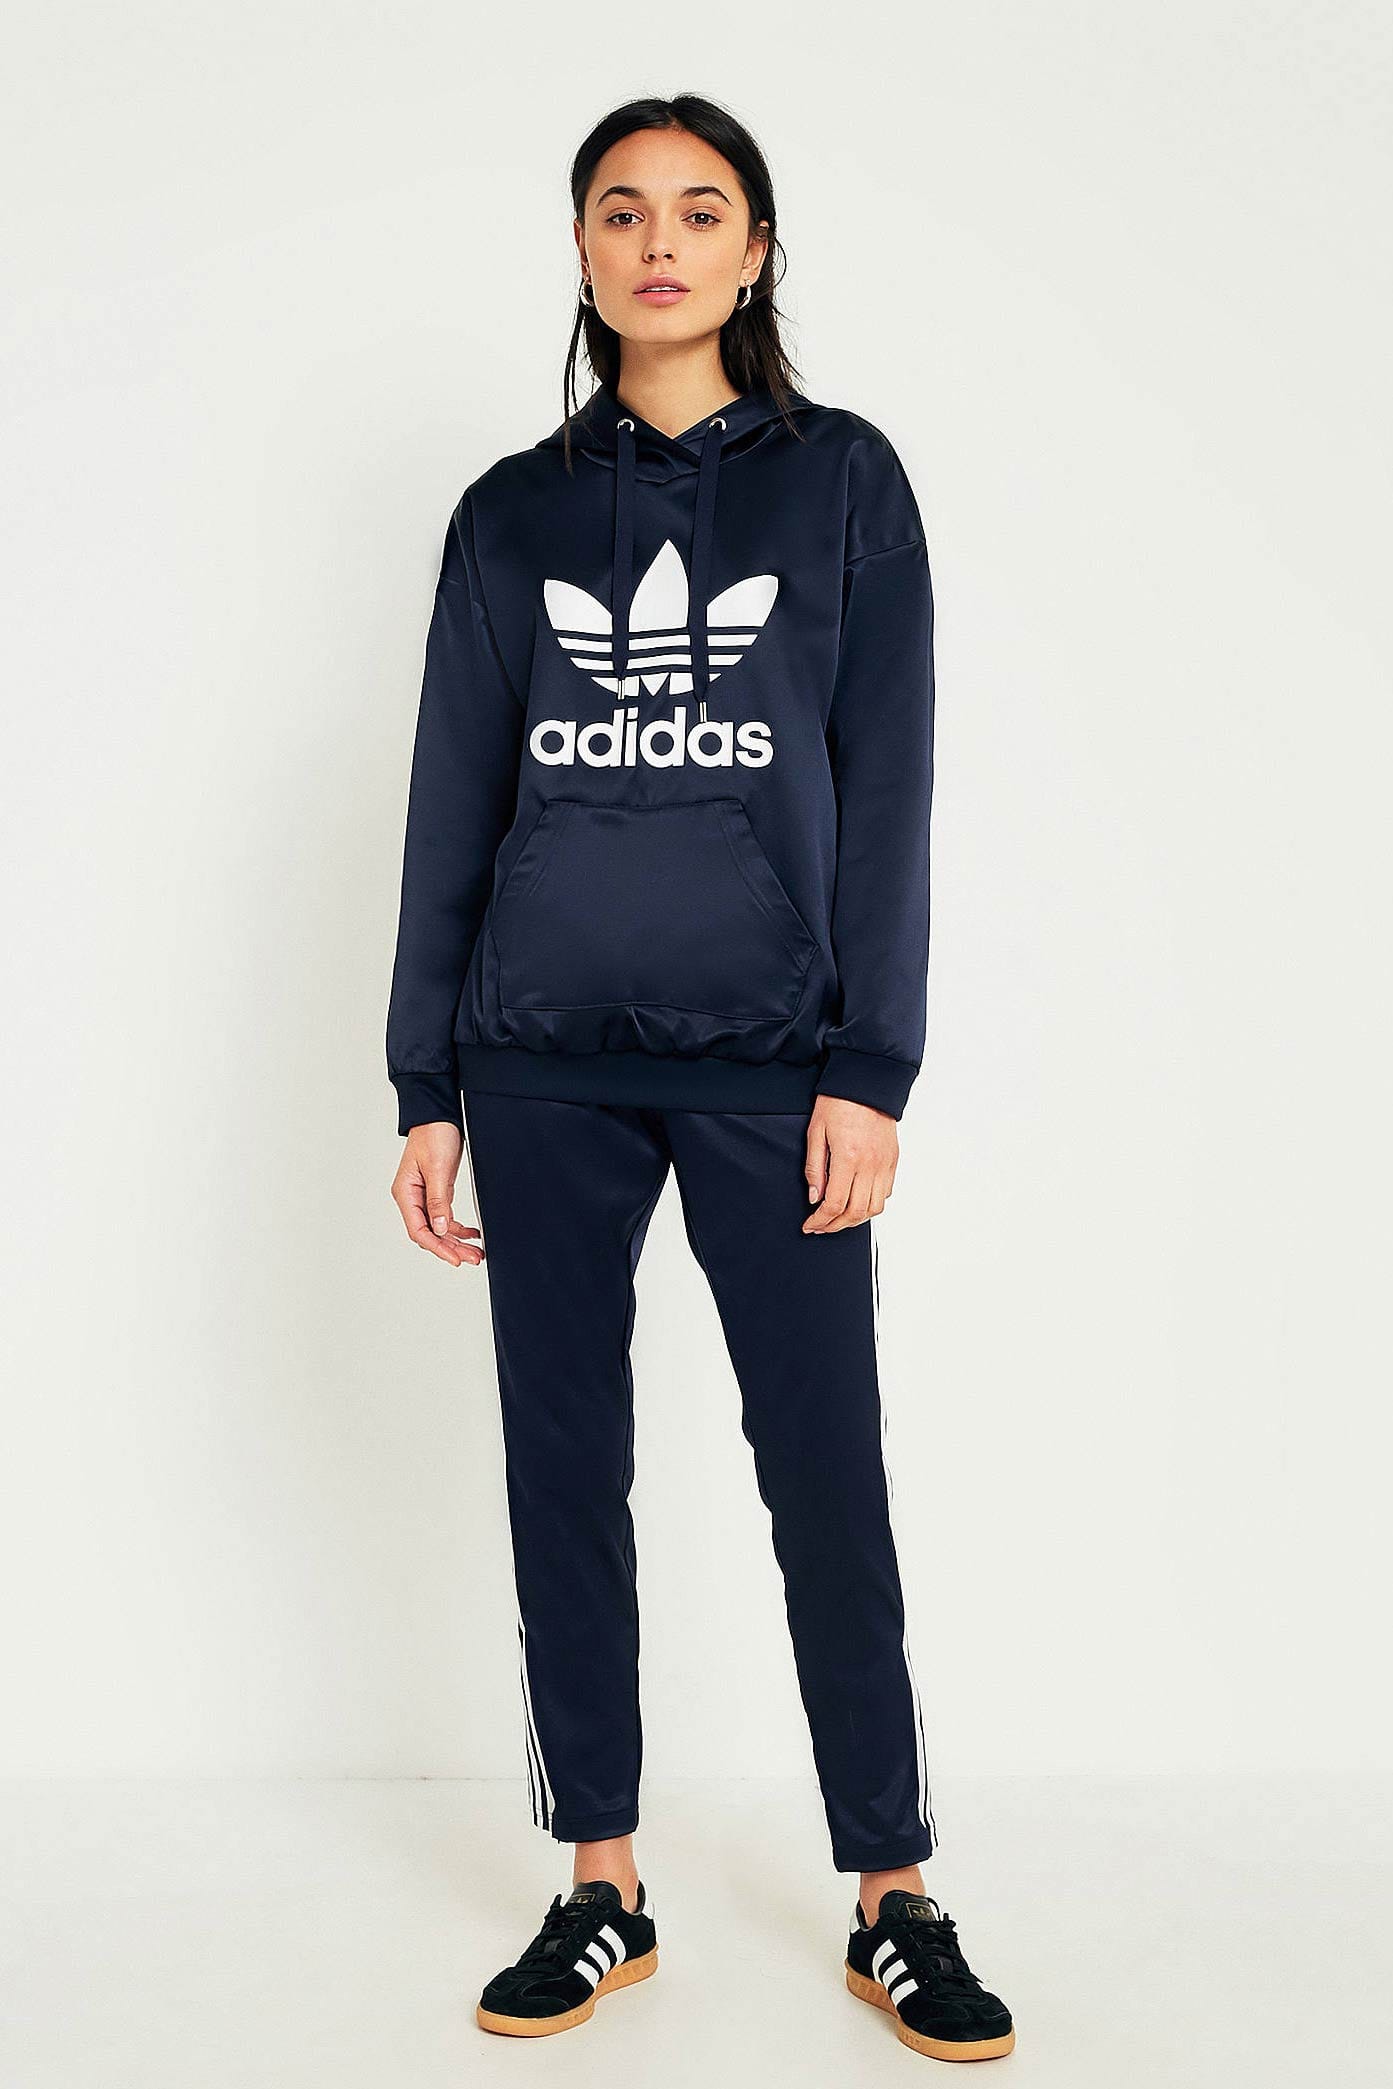 adidas sweater and pants